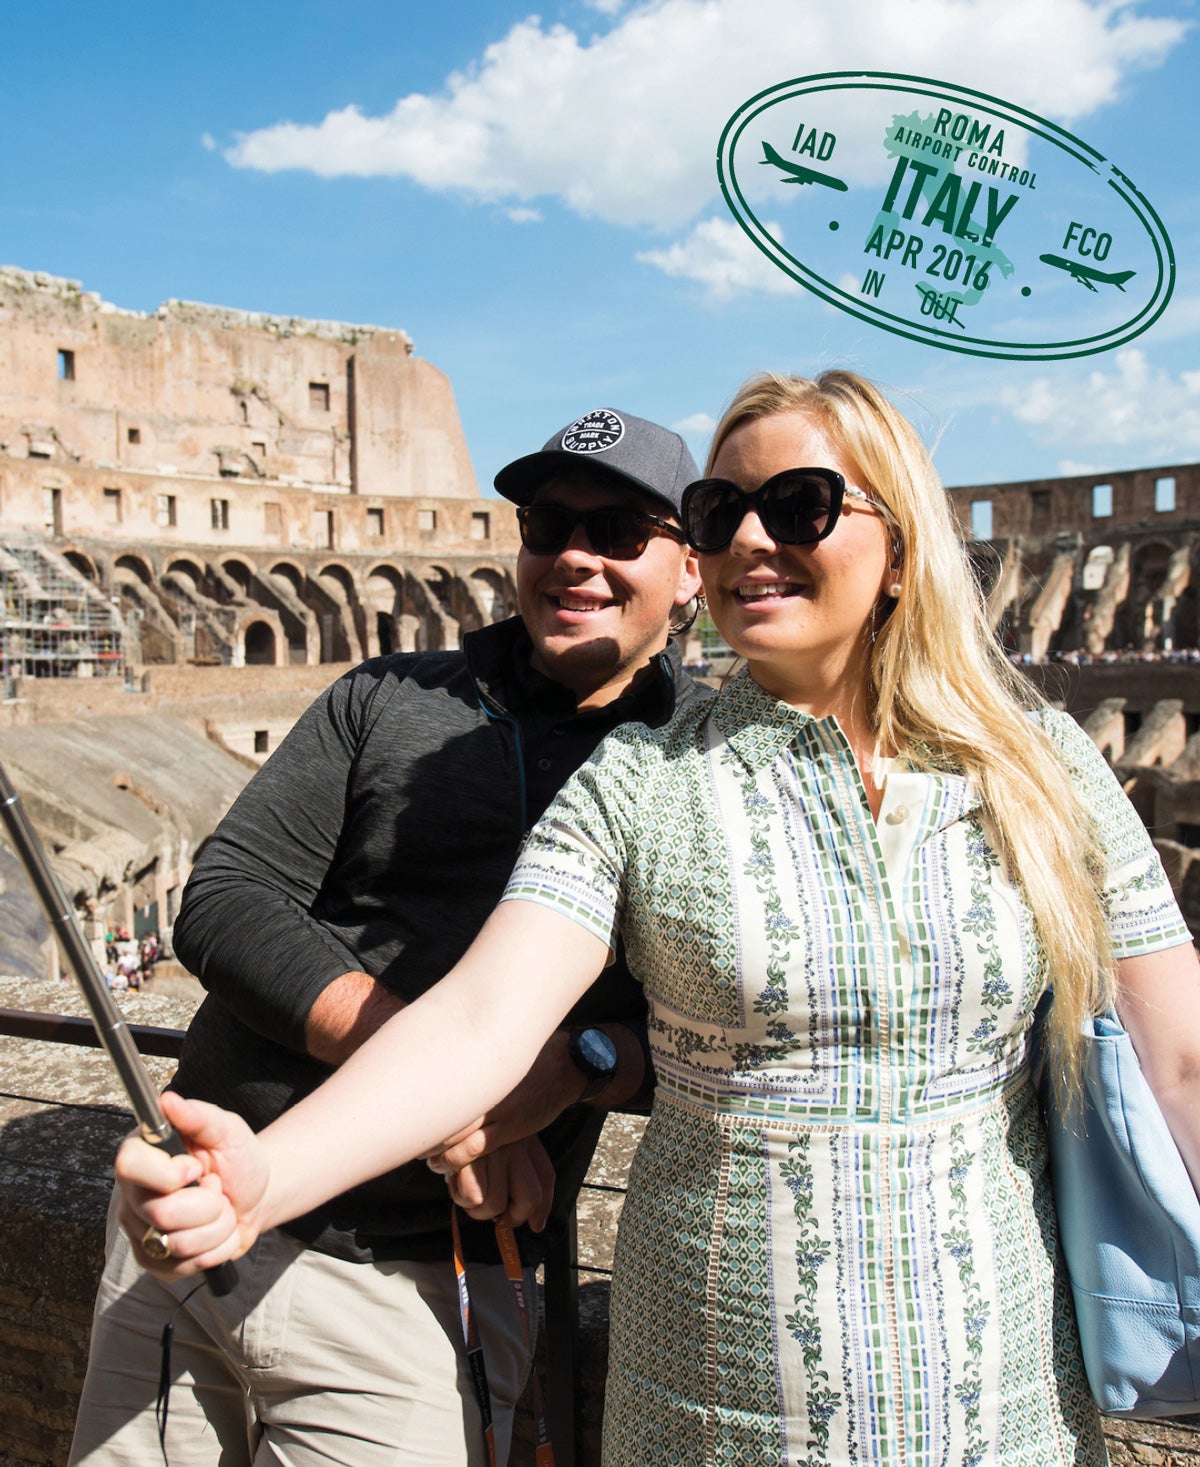 At John Carroll Weekend Rome in 2016, Hoyas explored the Colosseum and Forum together